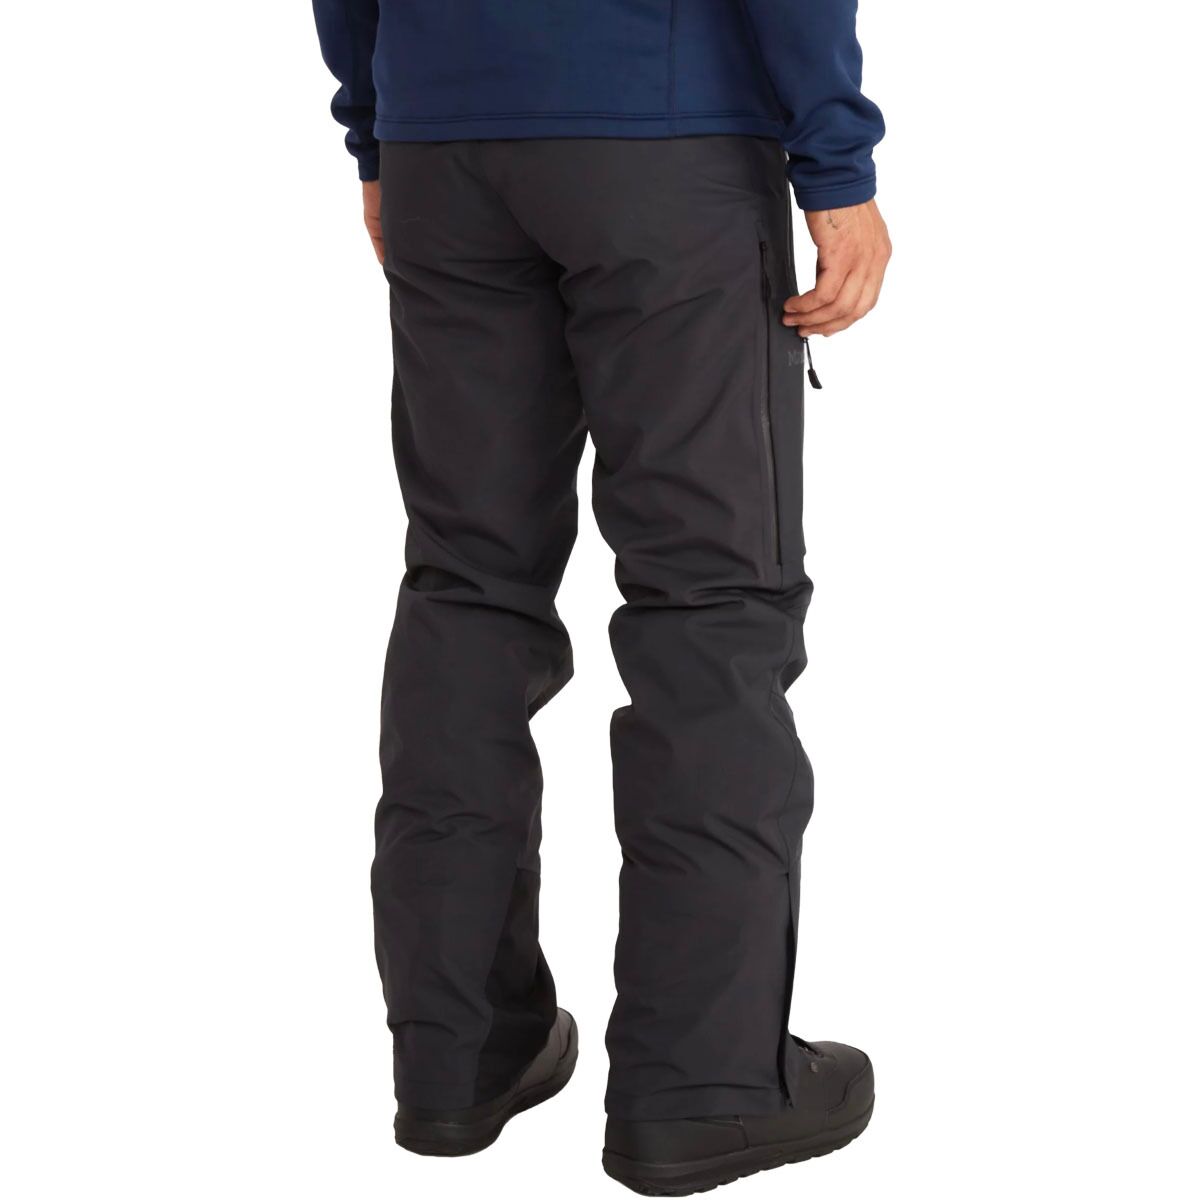 Marmot Refuge Pant - Men's, Black, Extra Large, — Mens Clothing Size: Extra  Large, Inseam Size: Regular, Gender: Male, Age Group: Adults — 11070-001-XL  — 32% Off - 1 out of 9 models